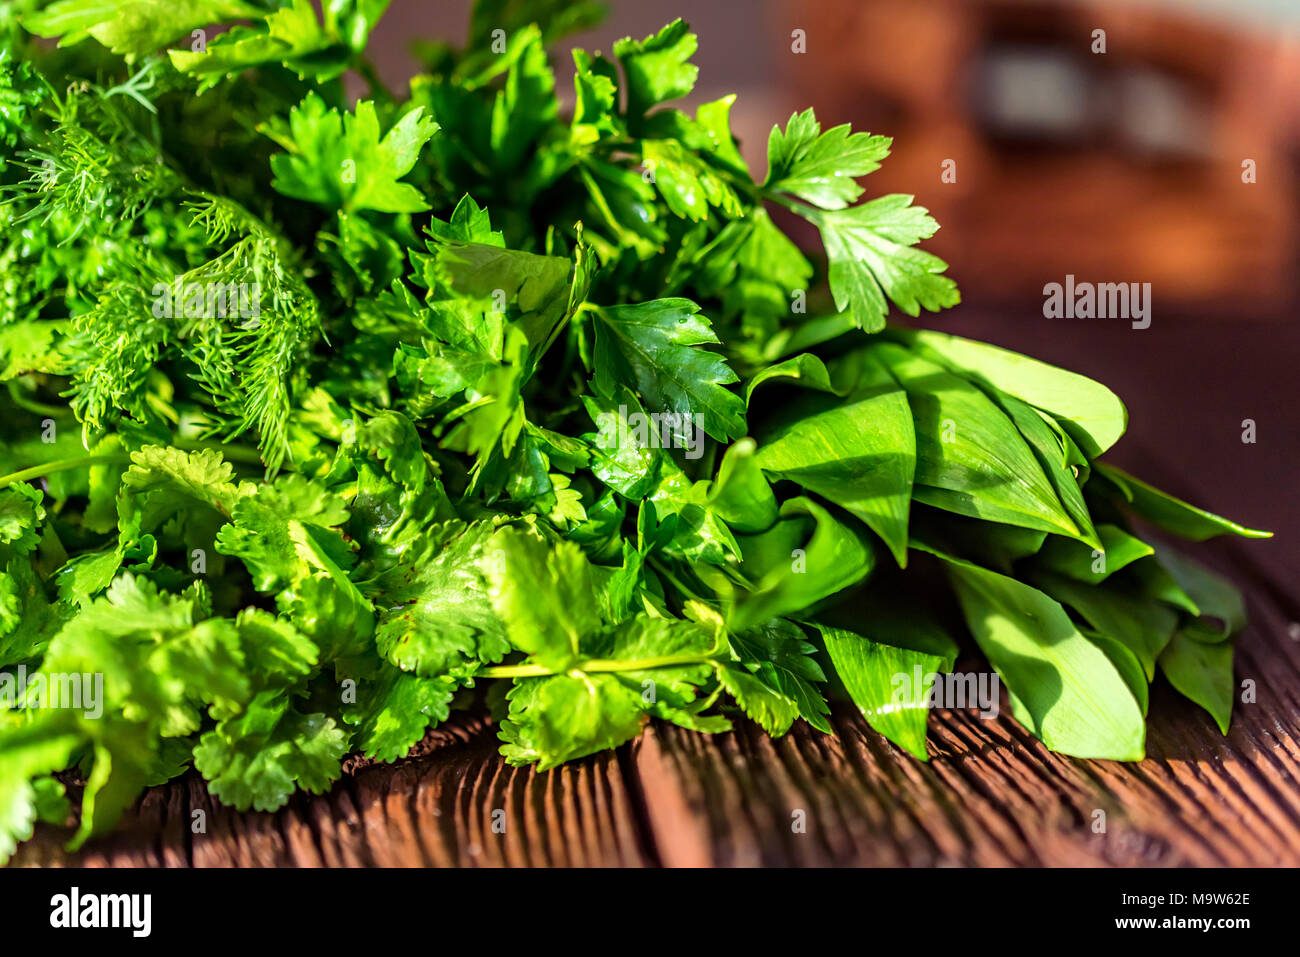 Fresh green cooking herbs on wooden background Stock Photo